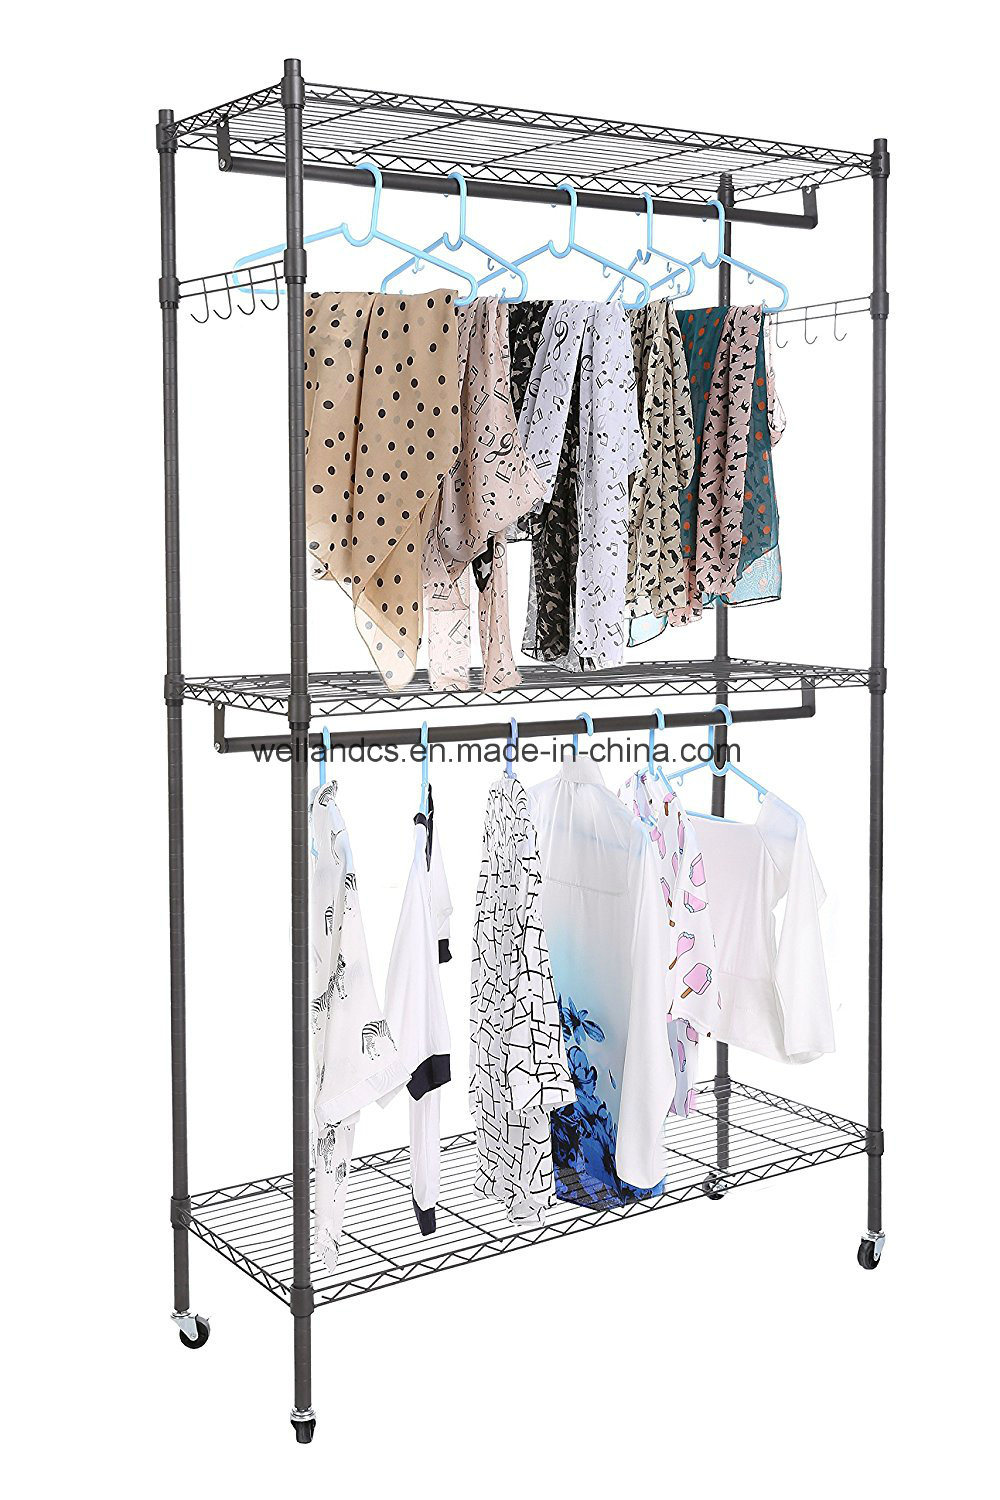 /proimages/2f0j00dTaYLbymfMqc/rolling-3-tiers-wire-clothing-shelving-heavy-duty-home-grade-garment-rack-with-wheels-and-side-hooks.jpg